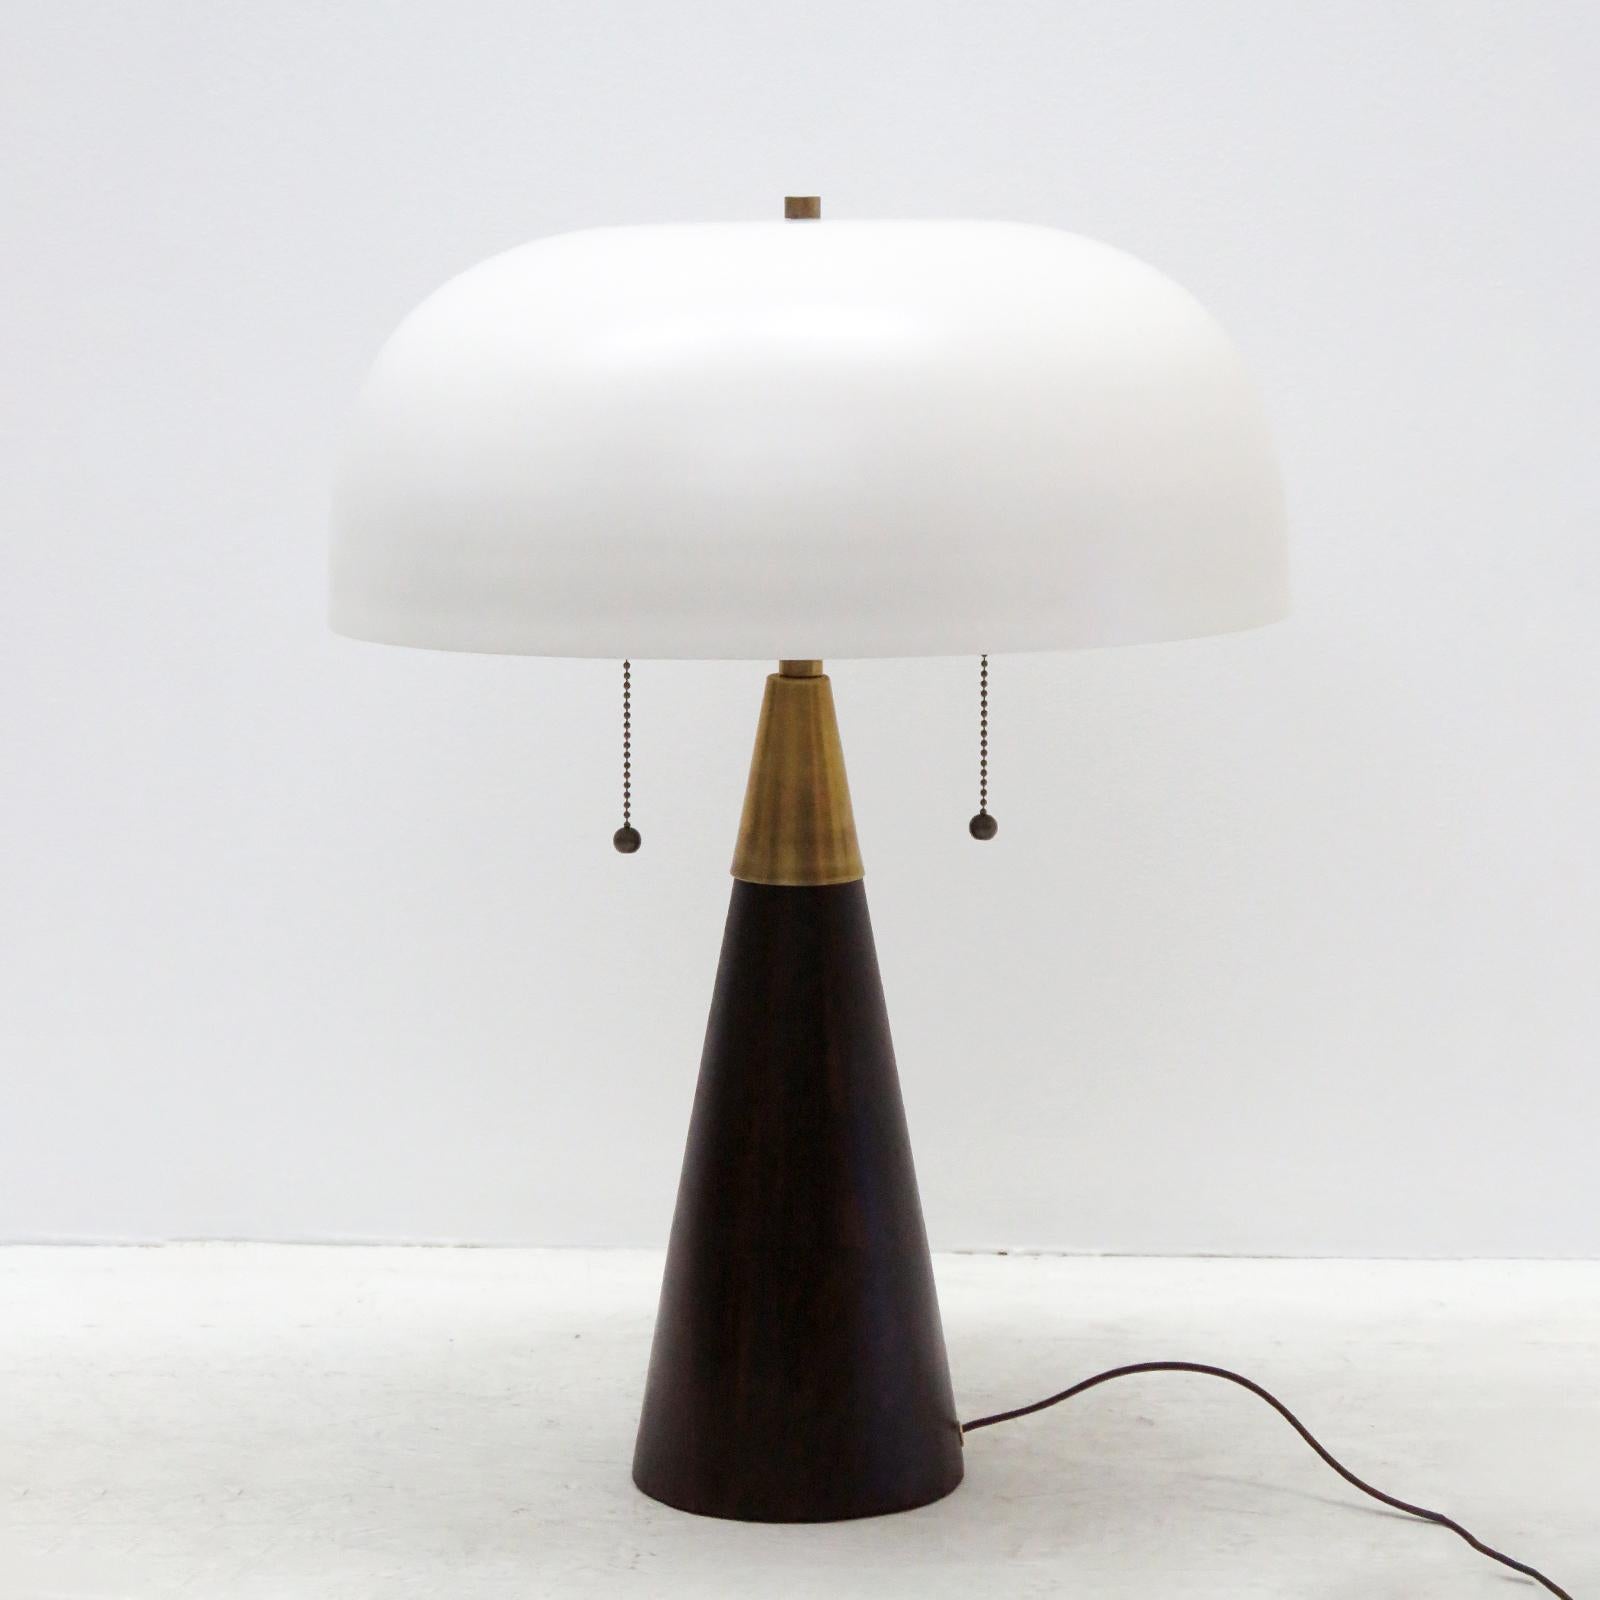 Wonderful organic modern table lamps by Alvaro Benitez for Gallery L7, with a walnuty stained wood base, a large off-white powder-coated metal shade and brass hardware. Dual bulb setup with two individual pull switches and a general in-line on/off